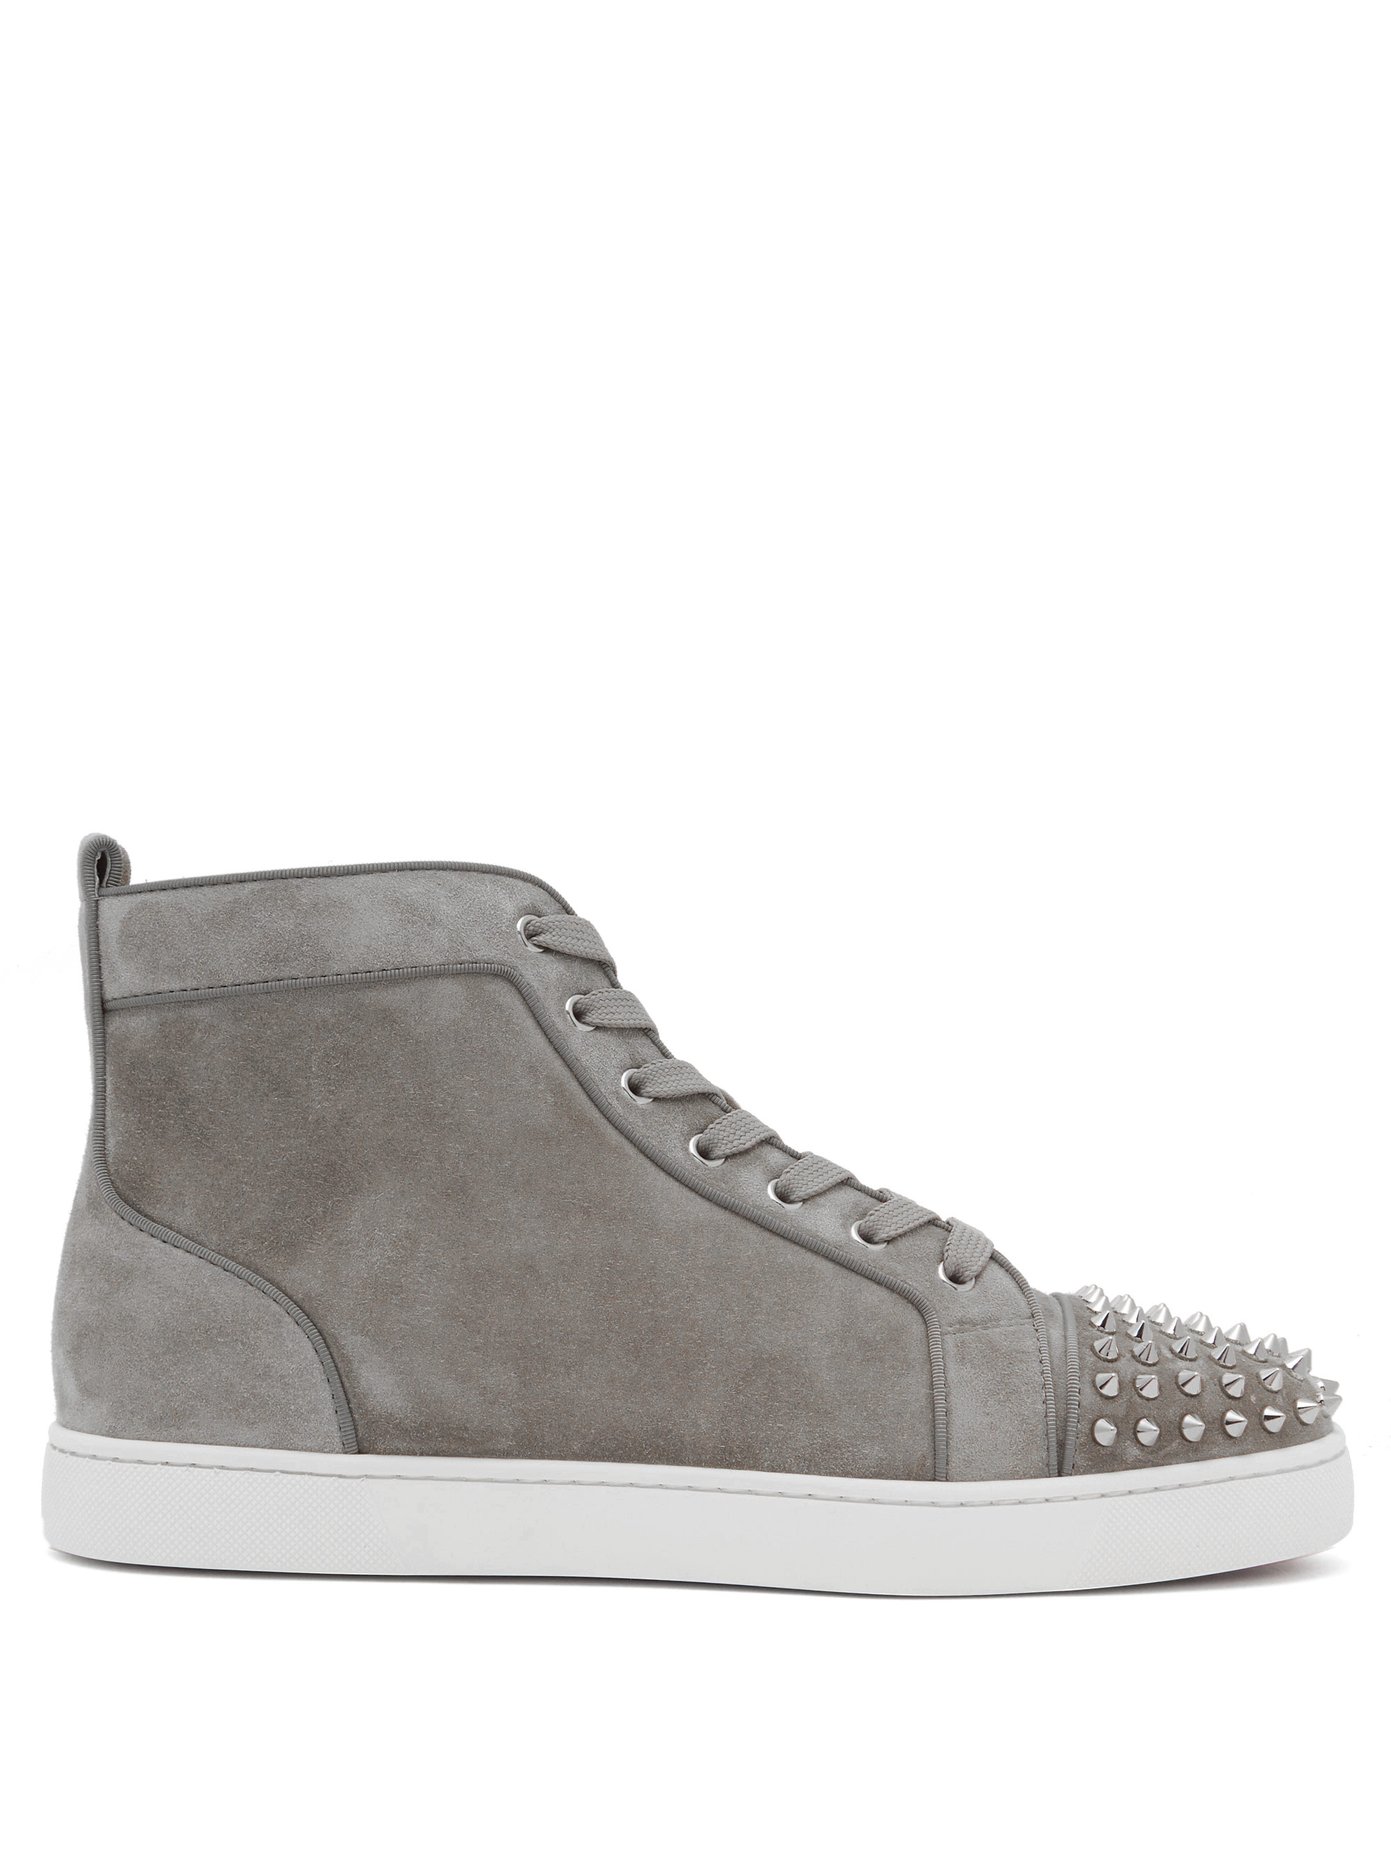 Louis spike-embellished high-top suede 